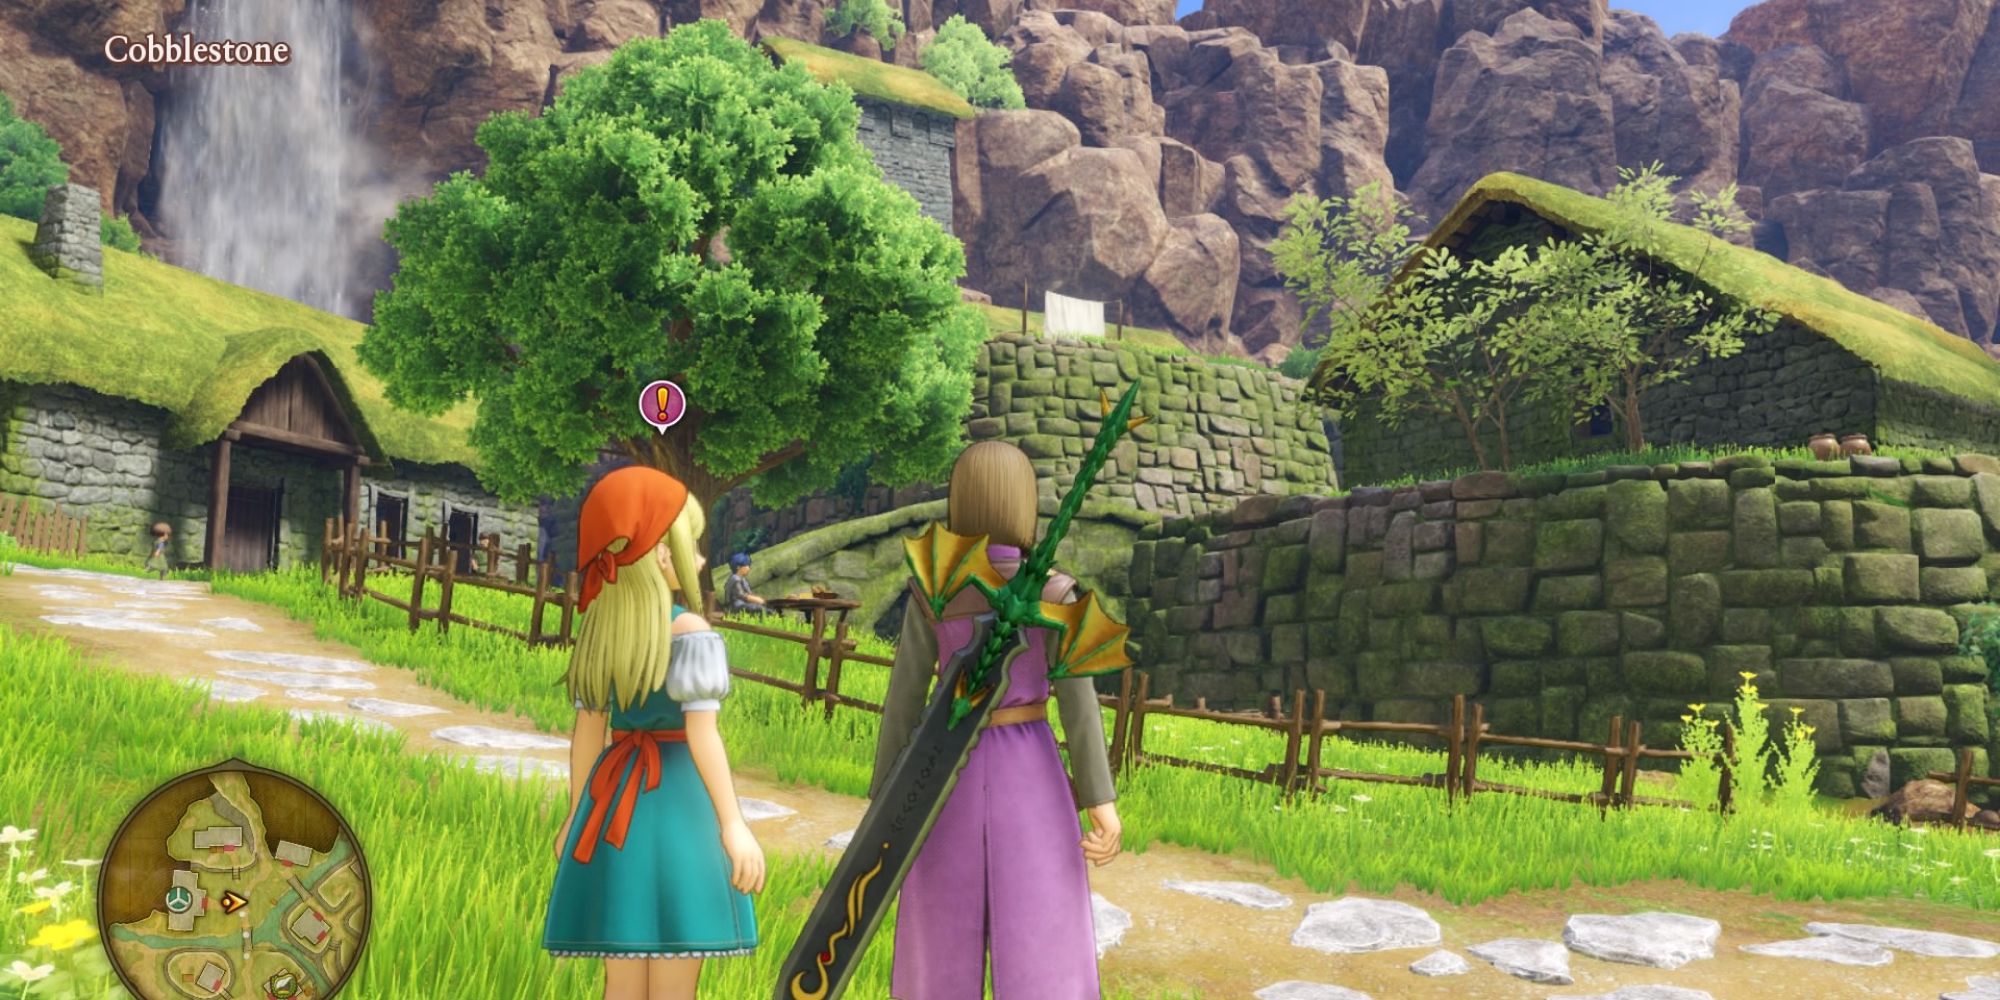 Dragon Quest Gemma and the Hero, surrounded by grass and a stone path, are stood near cobblestone walls and thatched roofed houses